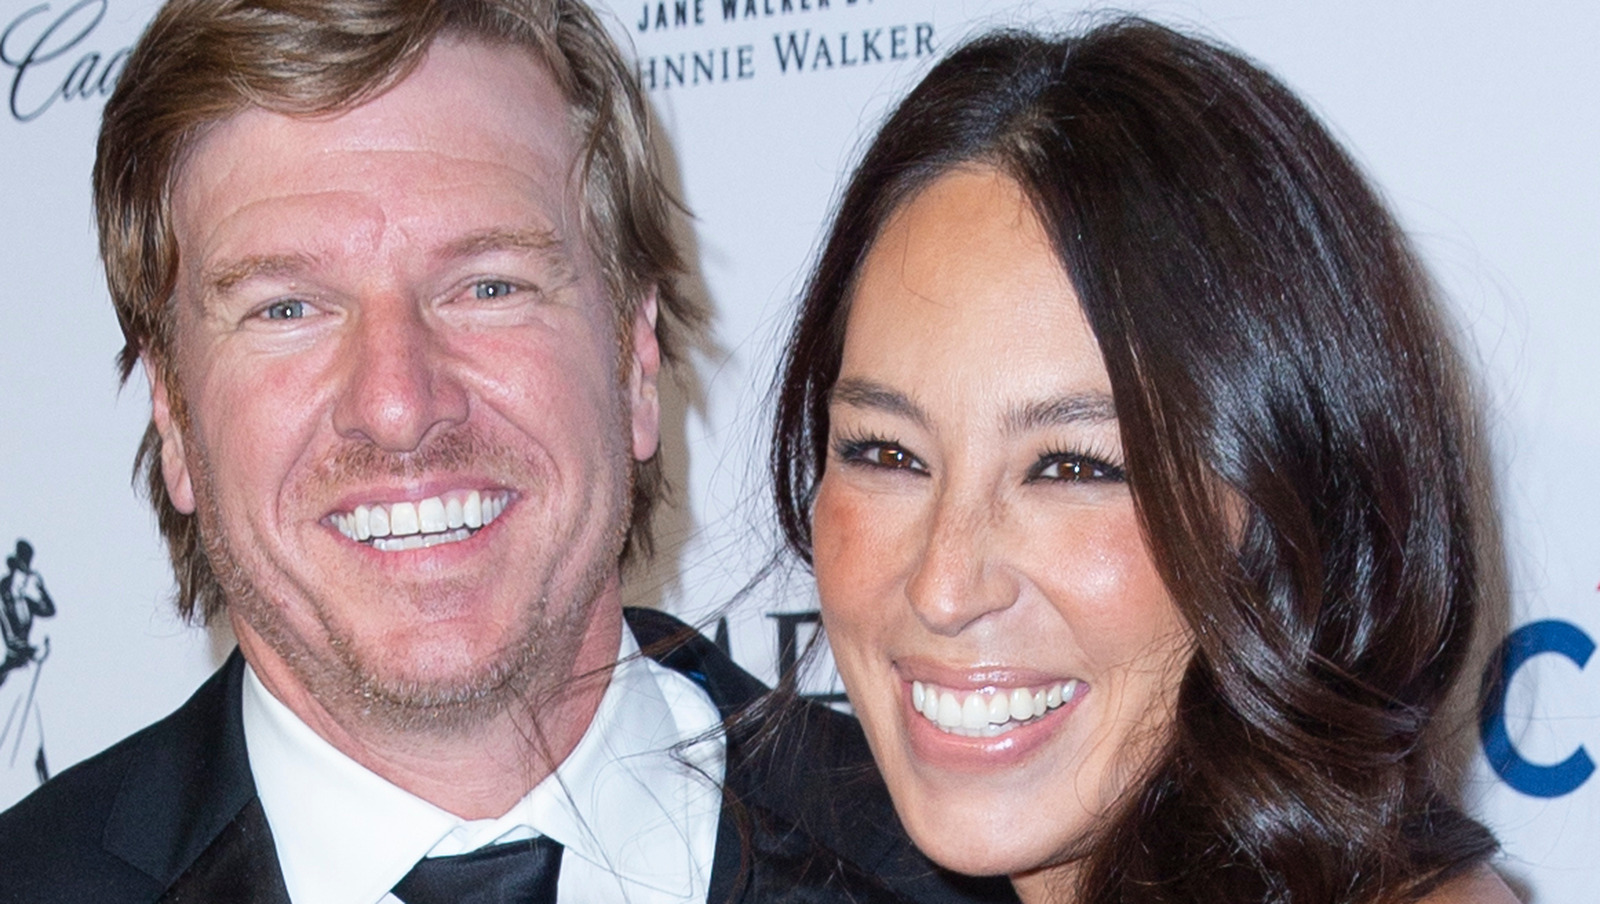 How Many Kids Do Chip And Joanna Gaines Have?